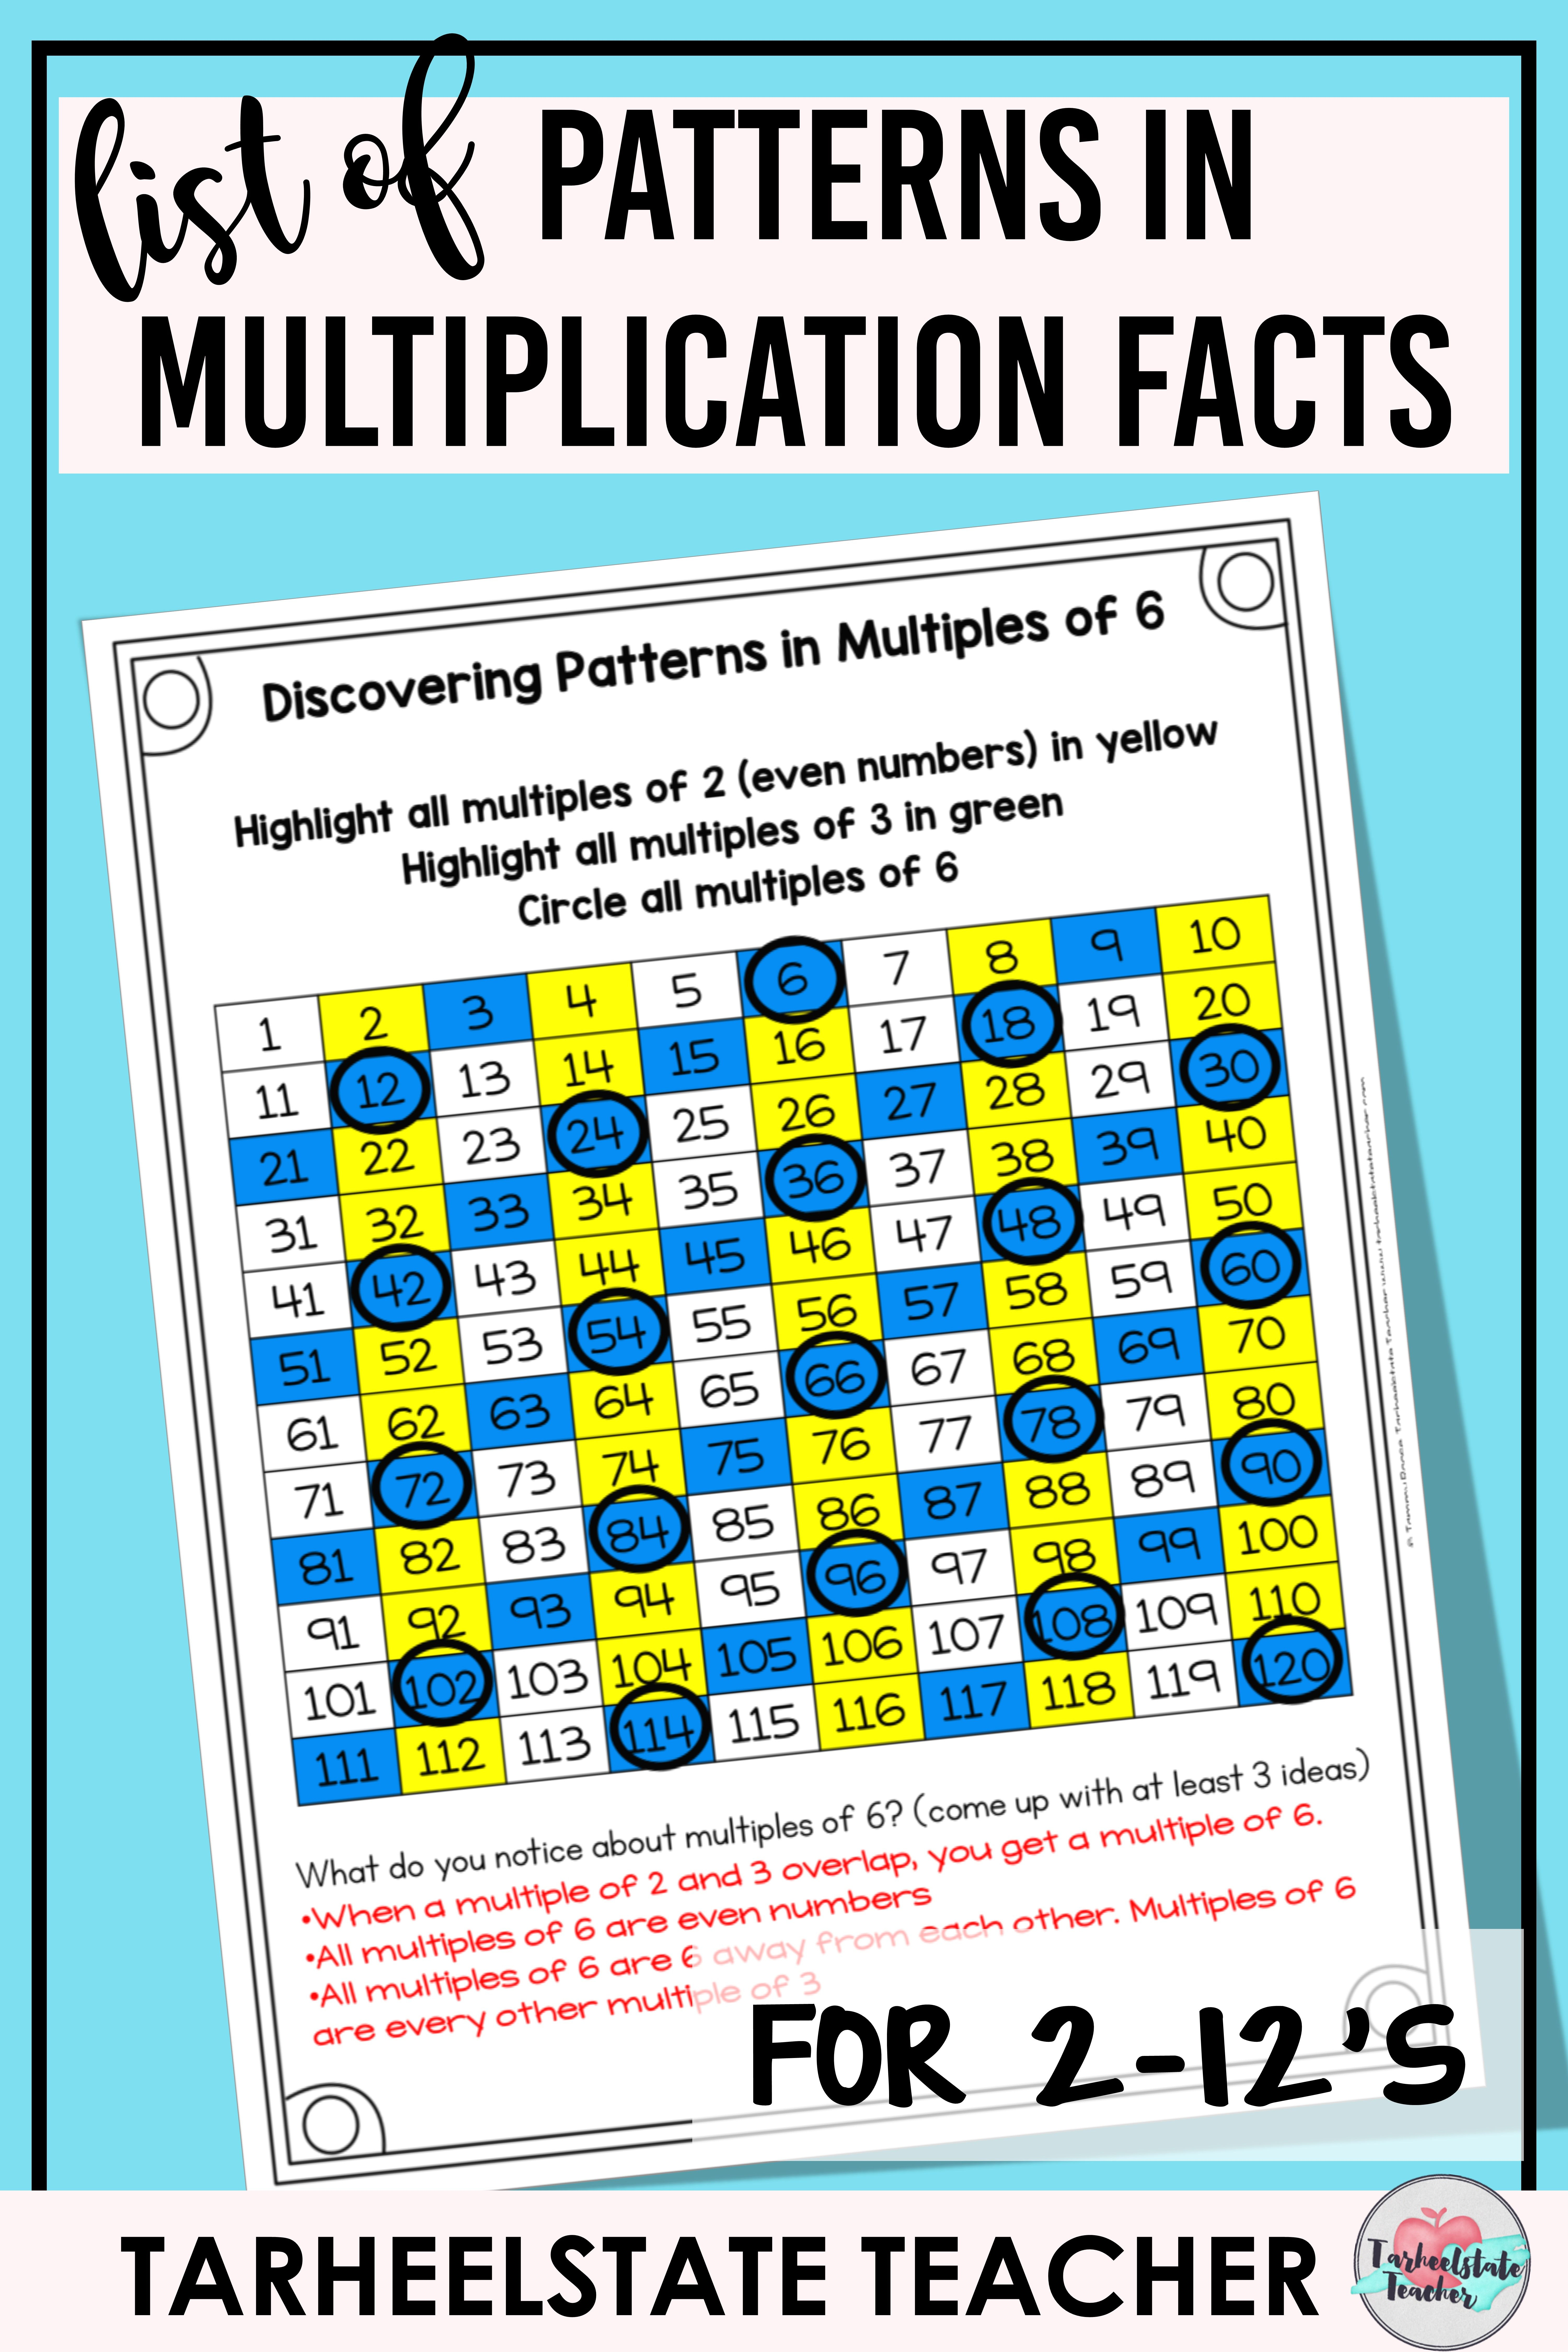 Multiplication Patterns In Times Tables — Tarheelstate